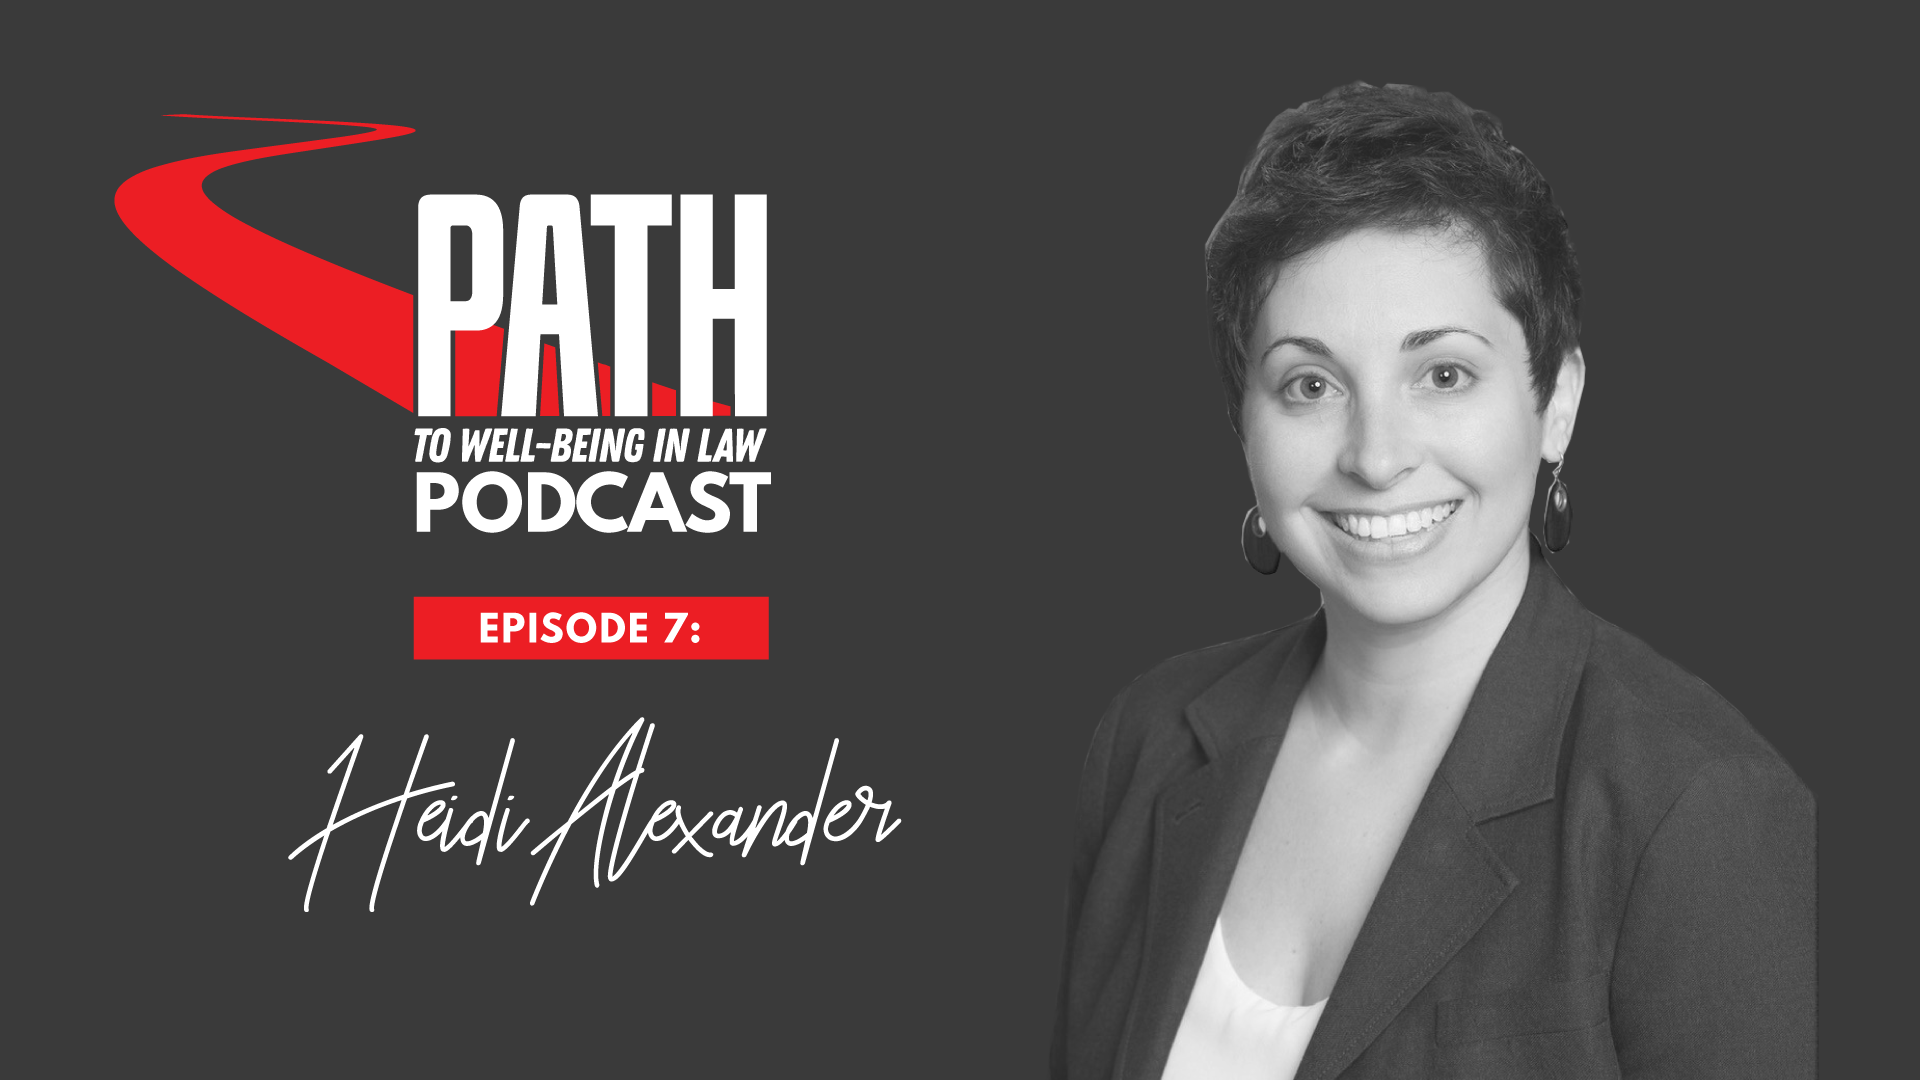 Path To Well-Being In Law Podcast: Episode 7 – Heidi Alexander